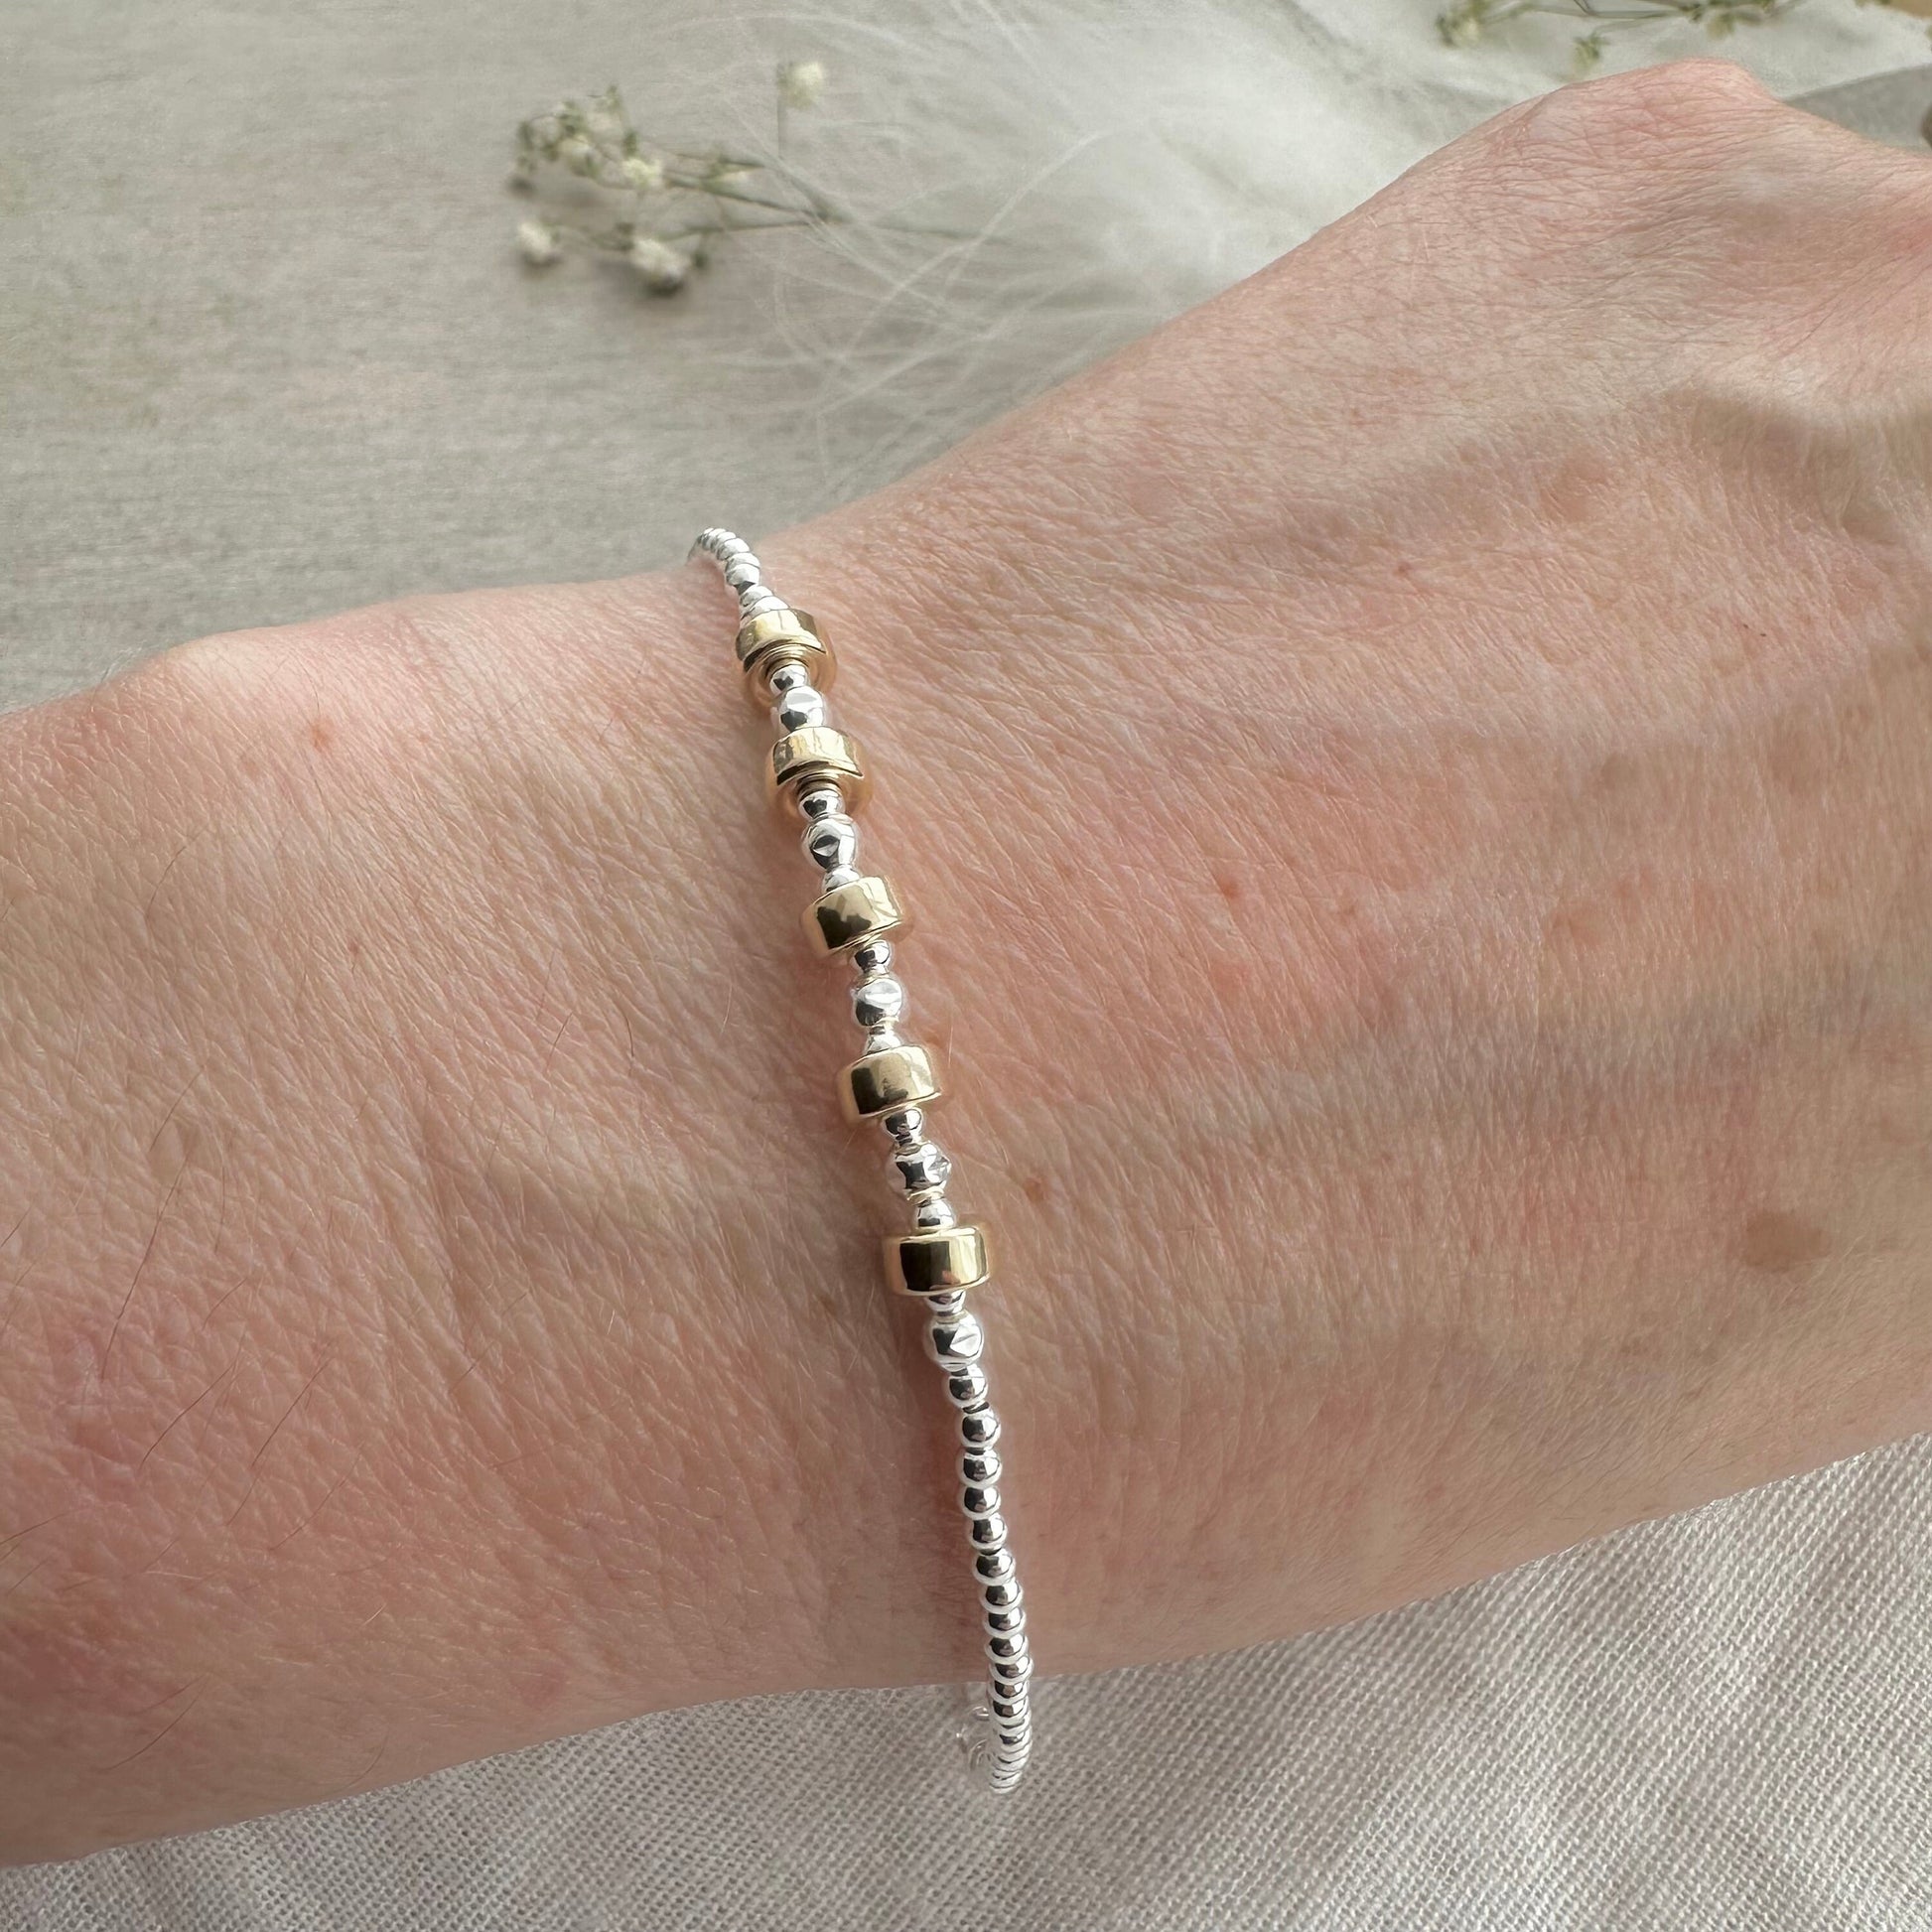 5 Decade Bracelet 50th Birthday Jewellery Gift for Her in Sterling Silver